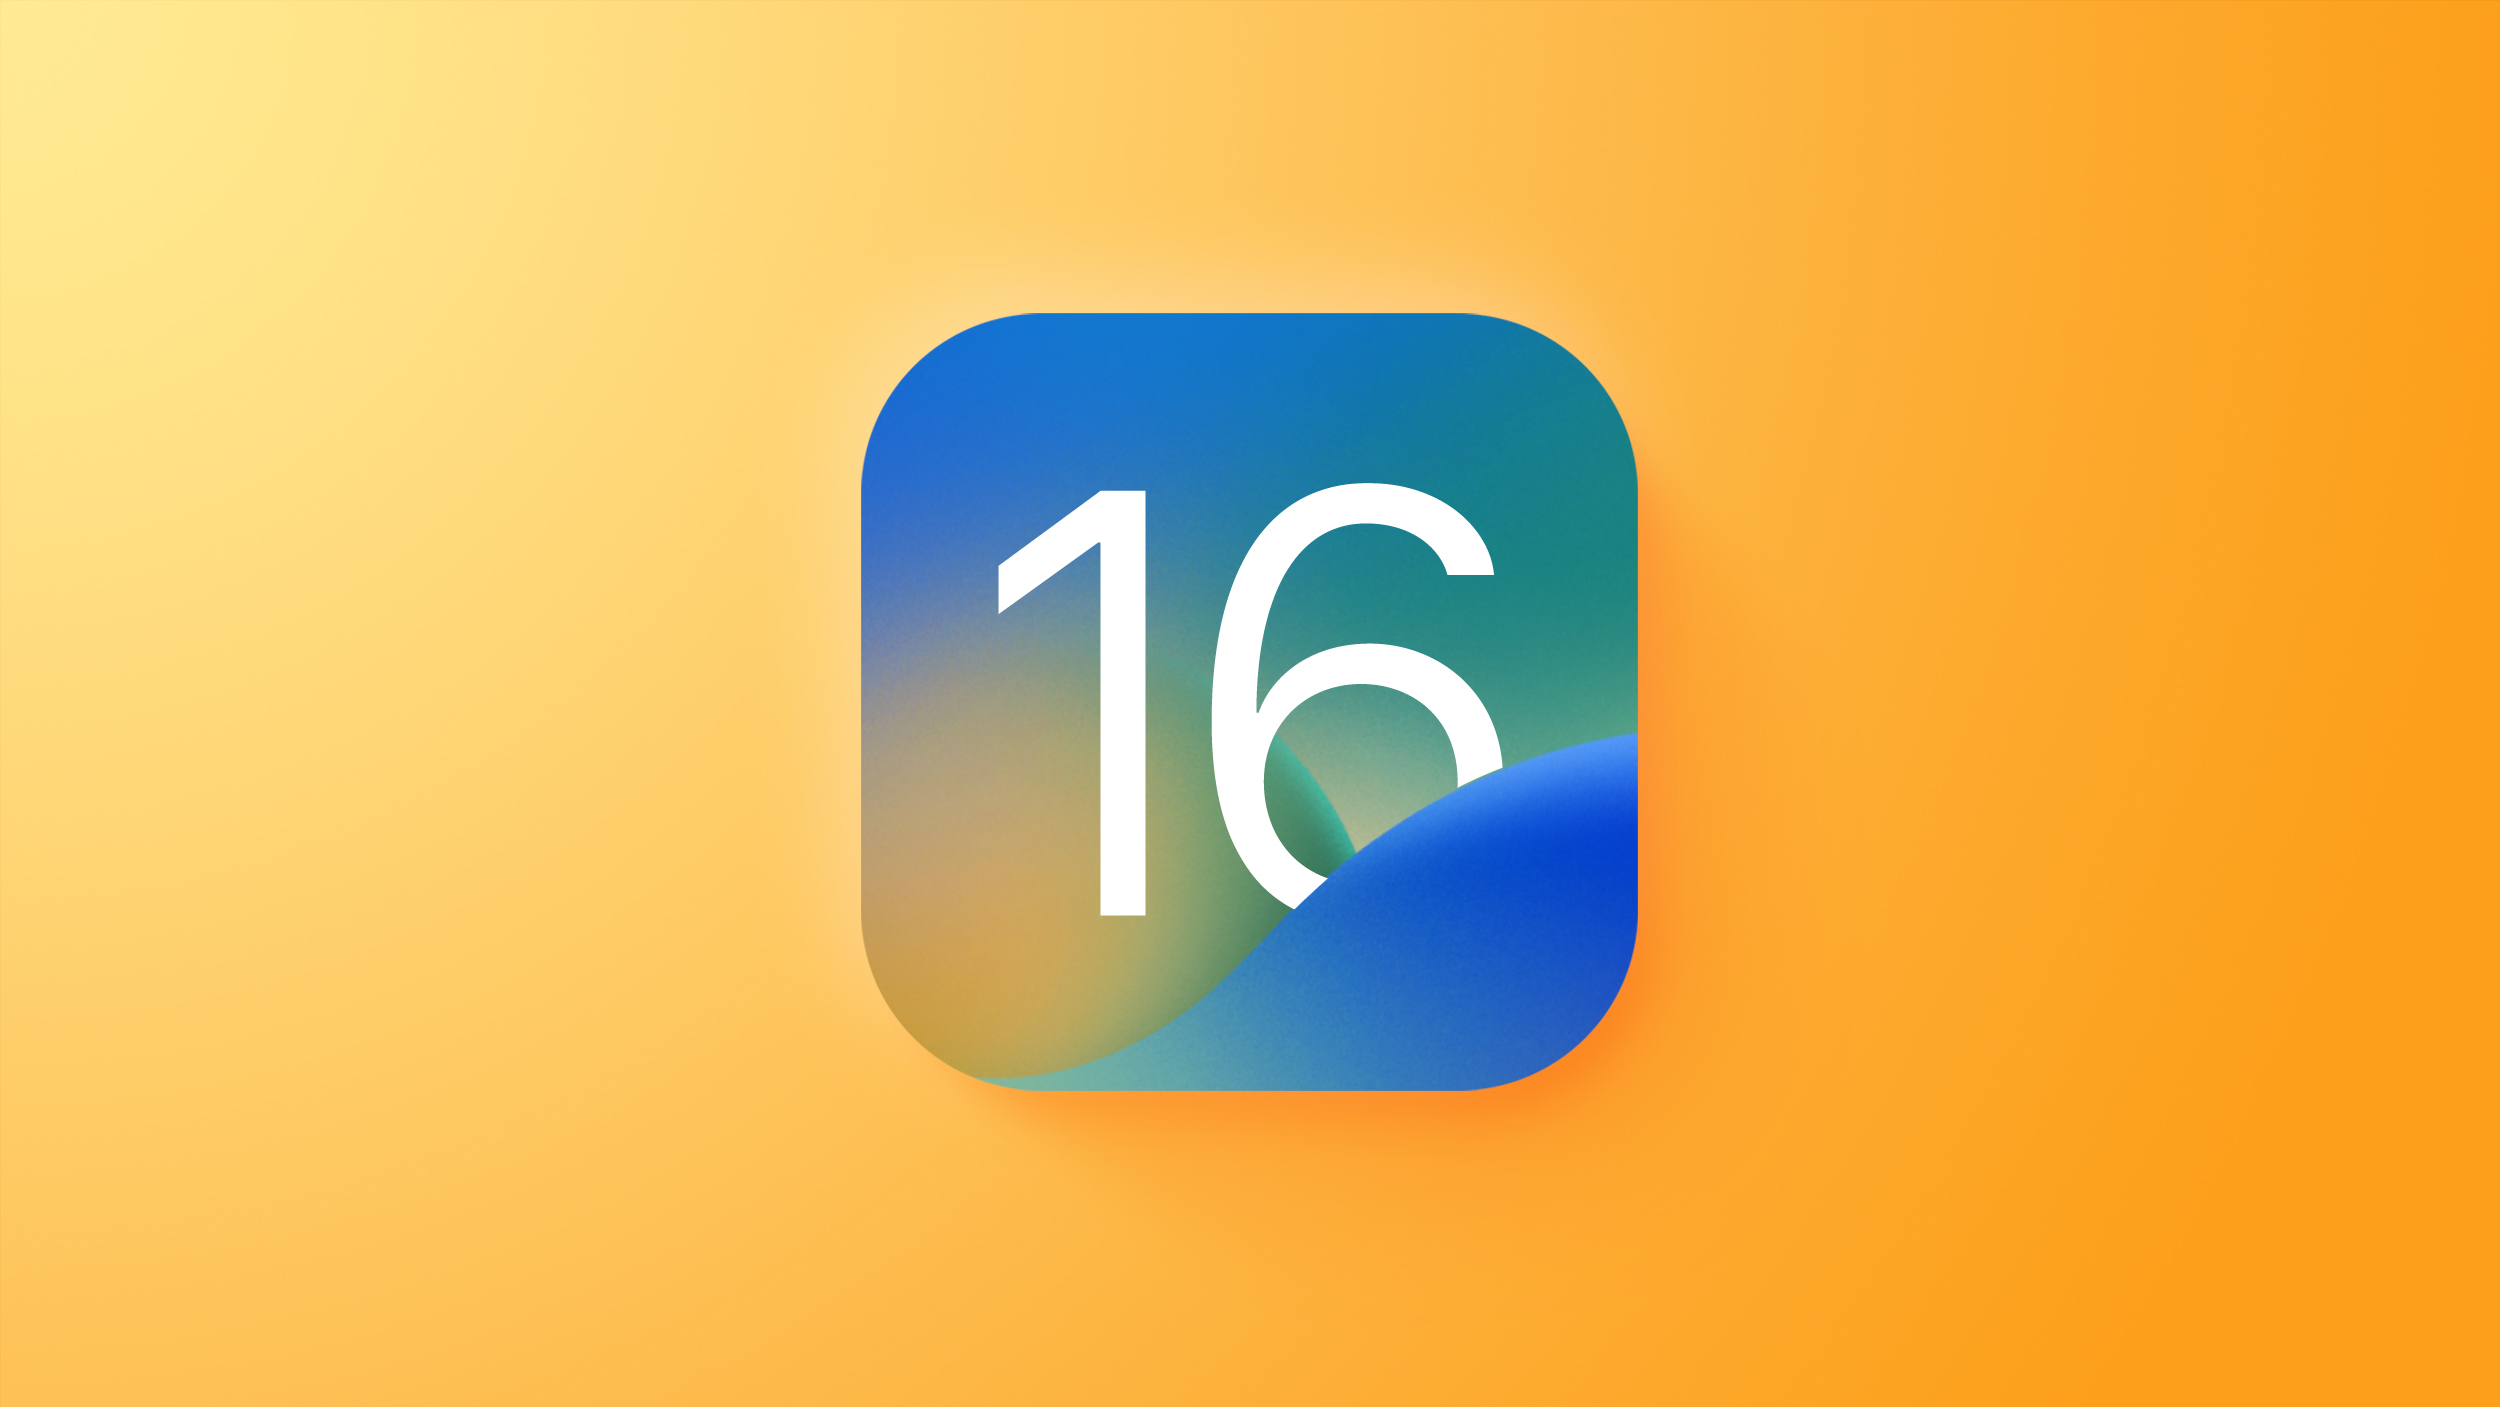 iOS 16.1 for iPhone Launching on Monday With These 8 New Features